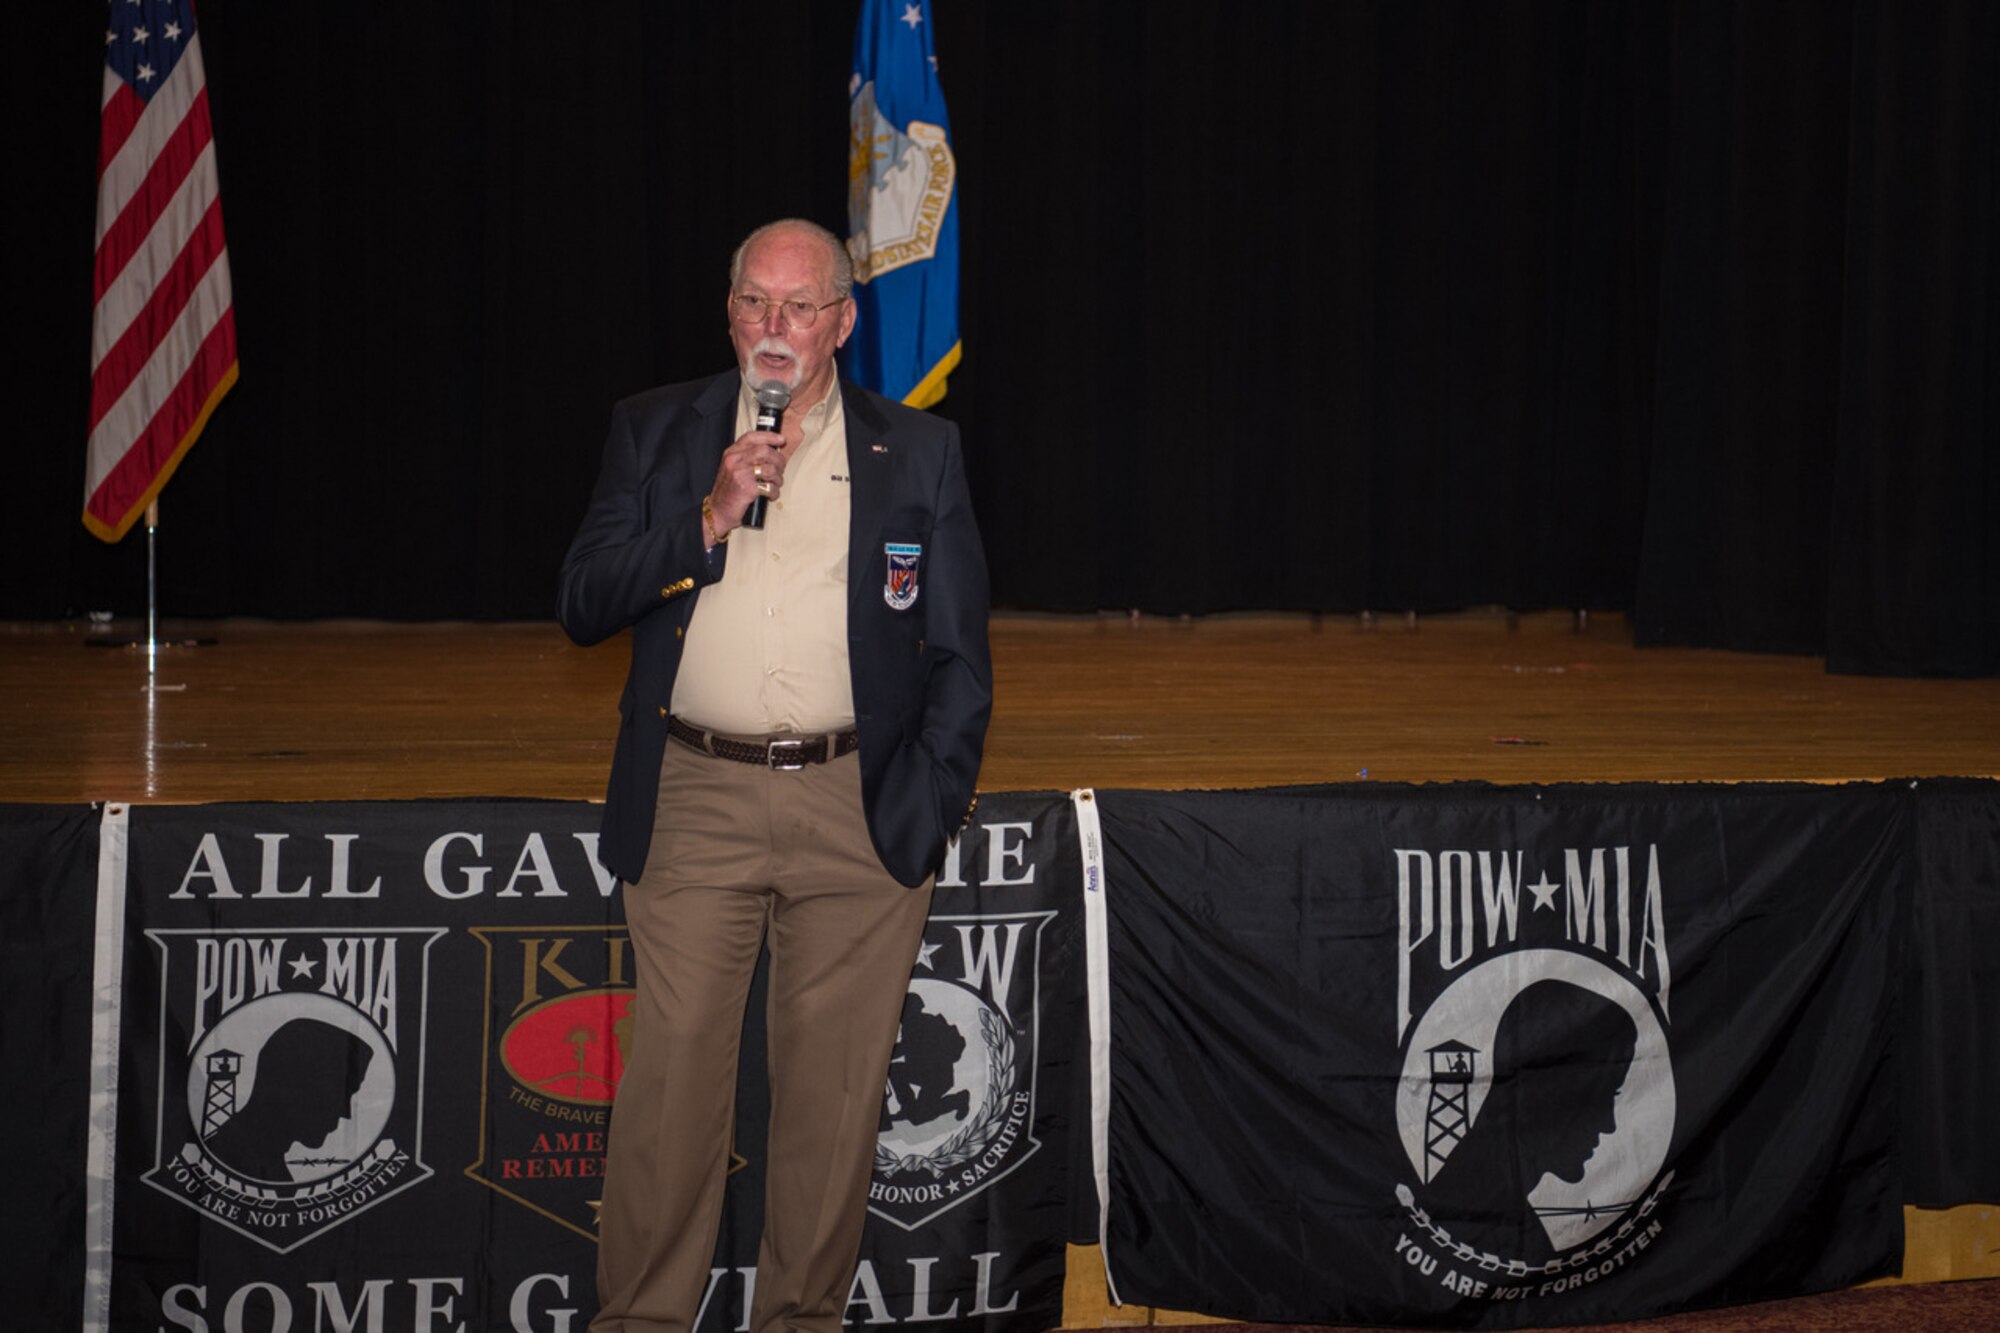 William Schwertfeger, retired U.S. Air Force Lt. Col., shares his story as a prisoner of war during the Vietnam conflict in 1972 at a POW/MIA Ceremony Sept. 17, 2020, at McConnell Air Force Base, Kansas. According to the Department of Defense Prisoner of War Missing Personnel Office, there are 1,657 personnel still missing from the Vietnam conflict. (U.S. Air Force photo by Airman 1st Class Marc A. Garcia)